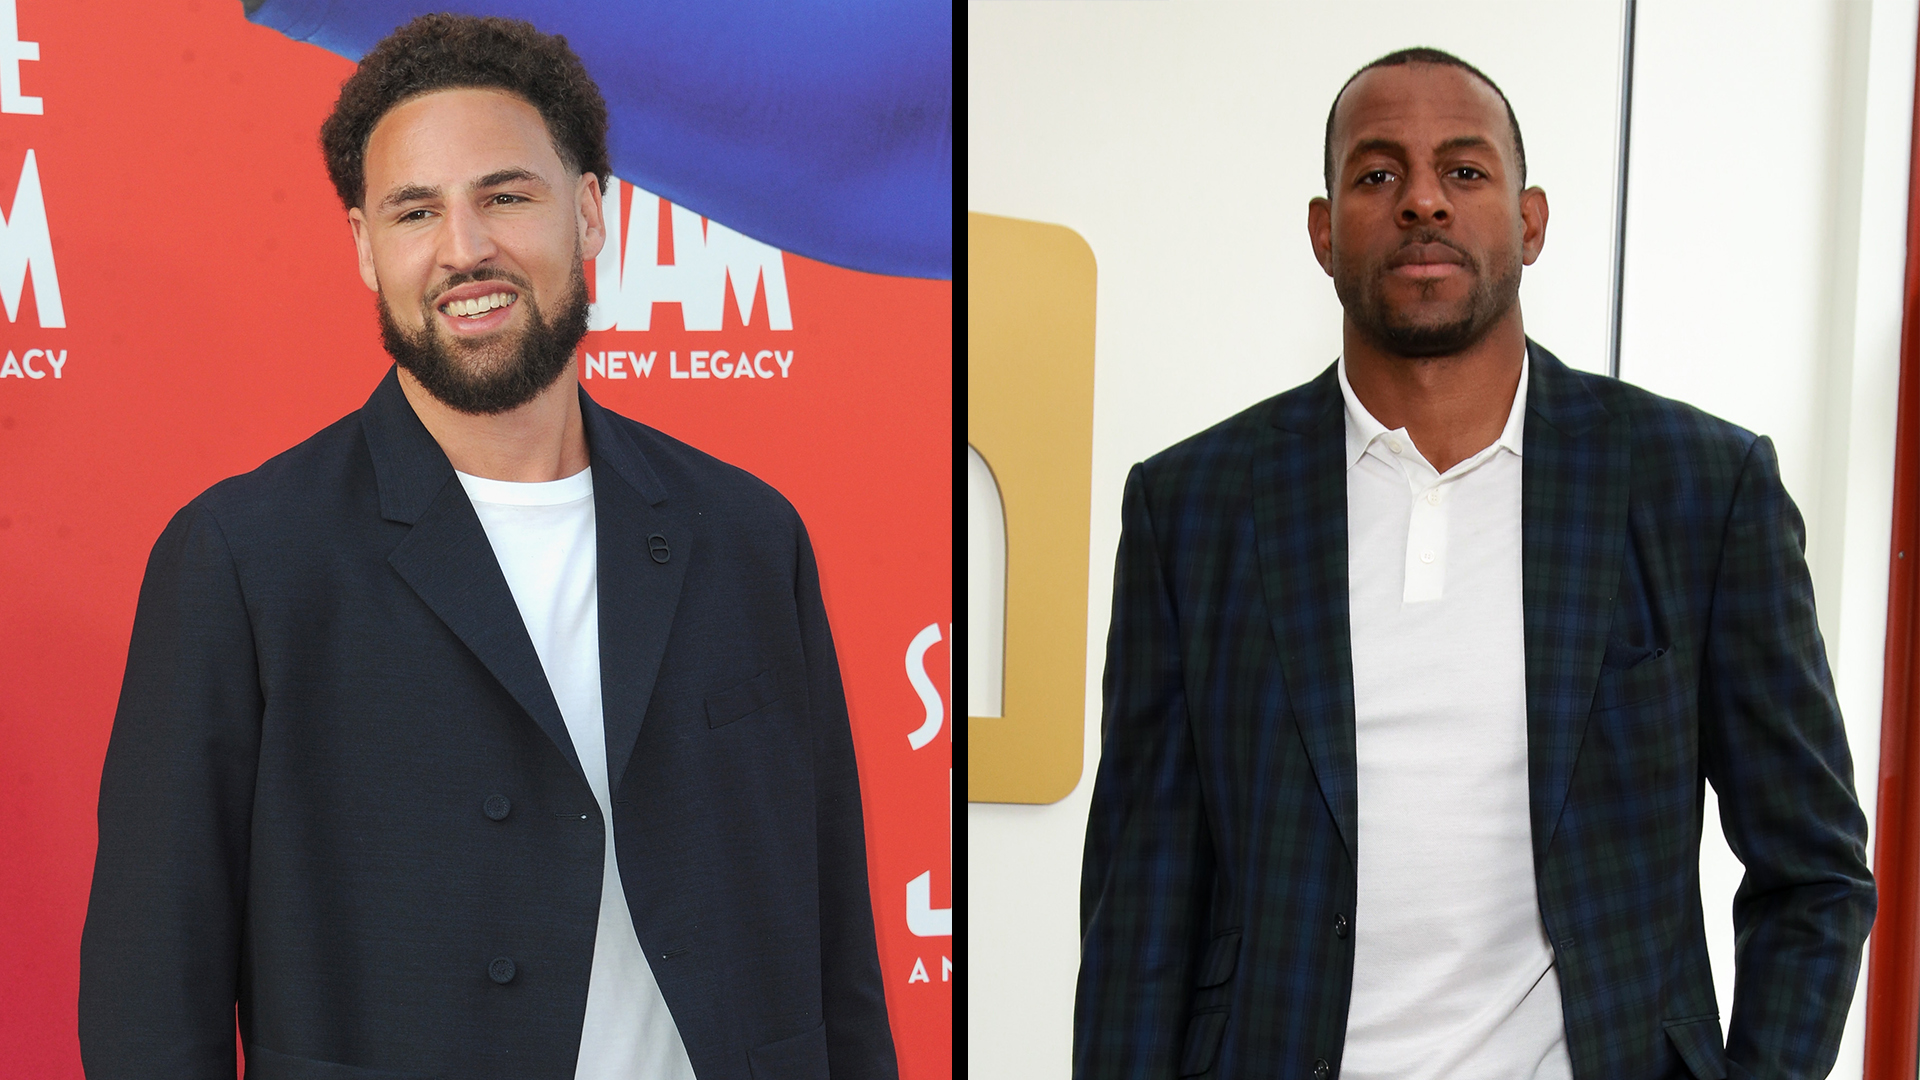 Golden State Warriors' Klay Thompson, Andre Iguodala To Take Part Of Their Salaries In Bitcoin